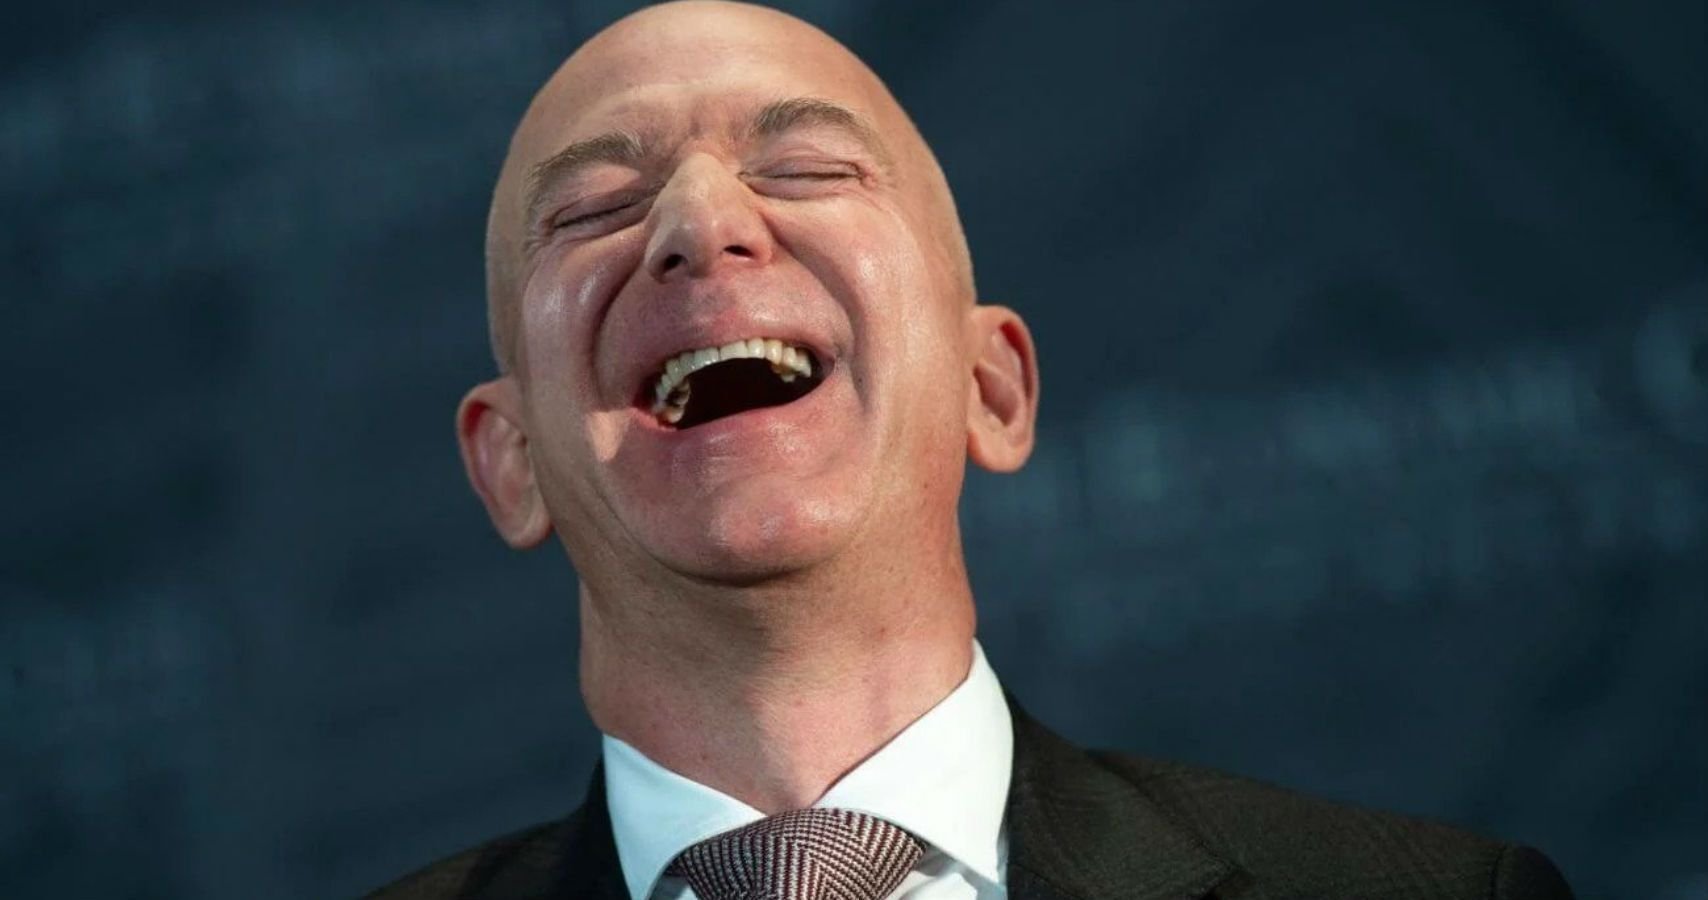 No, Jeff Bezos Is Not About To Become The World's First Trillionaire